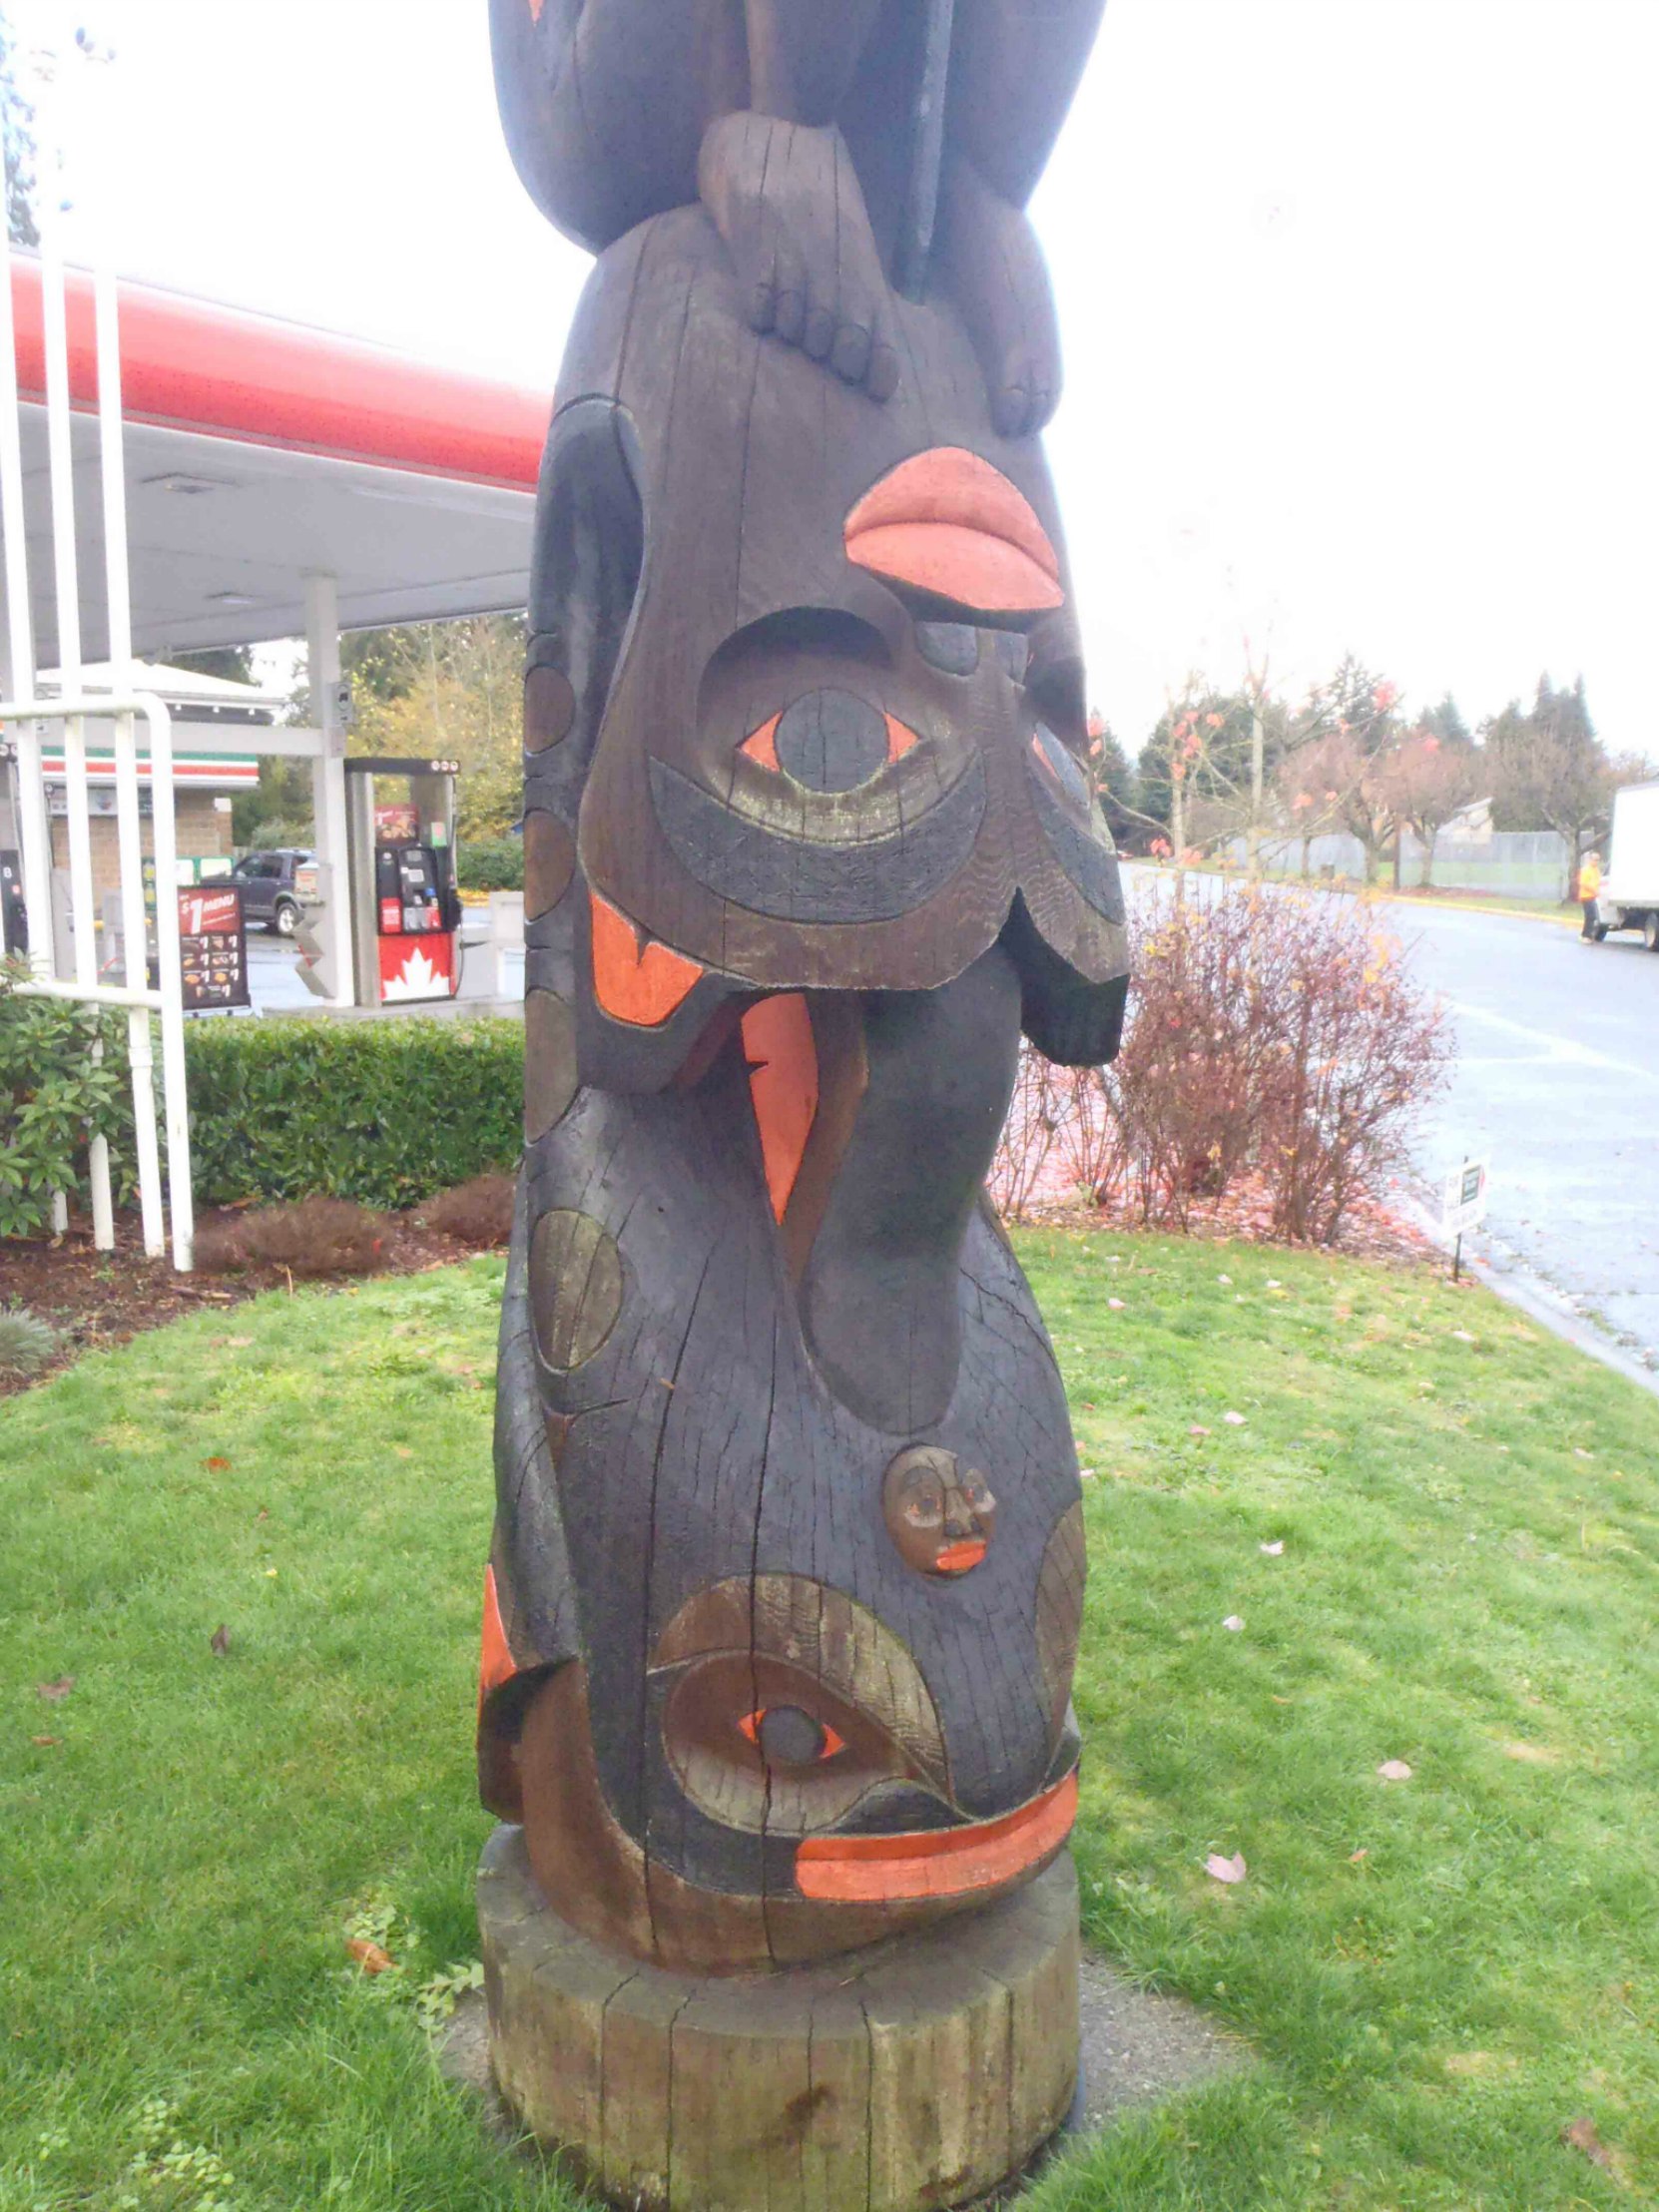 Fisherman's Pole, Killer Whale figure, Government Street at College Street, Duncan, B.C.